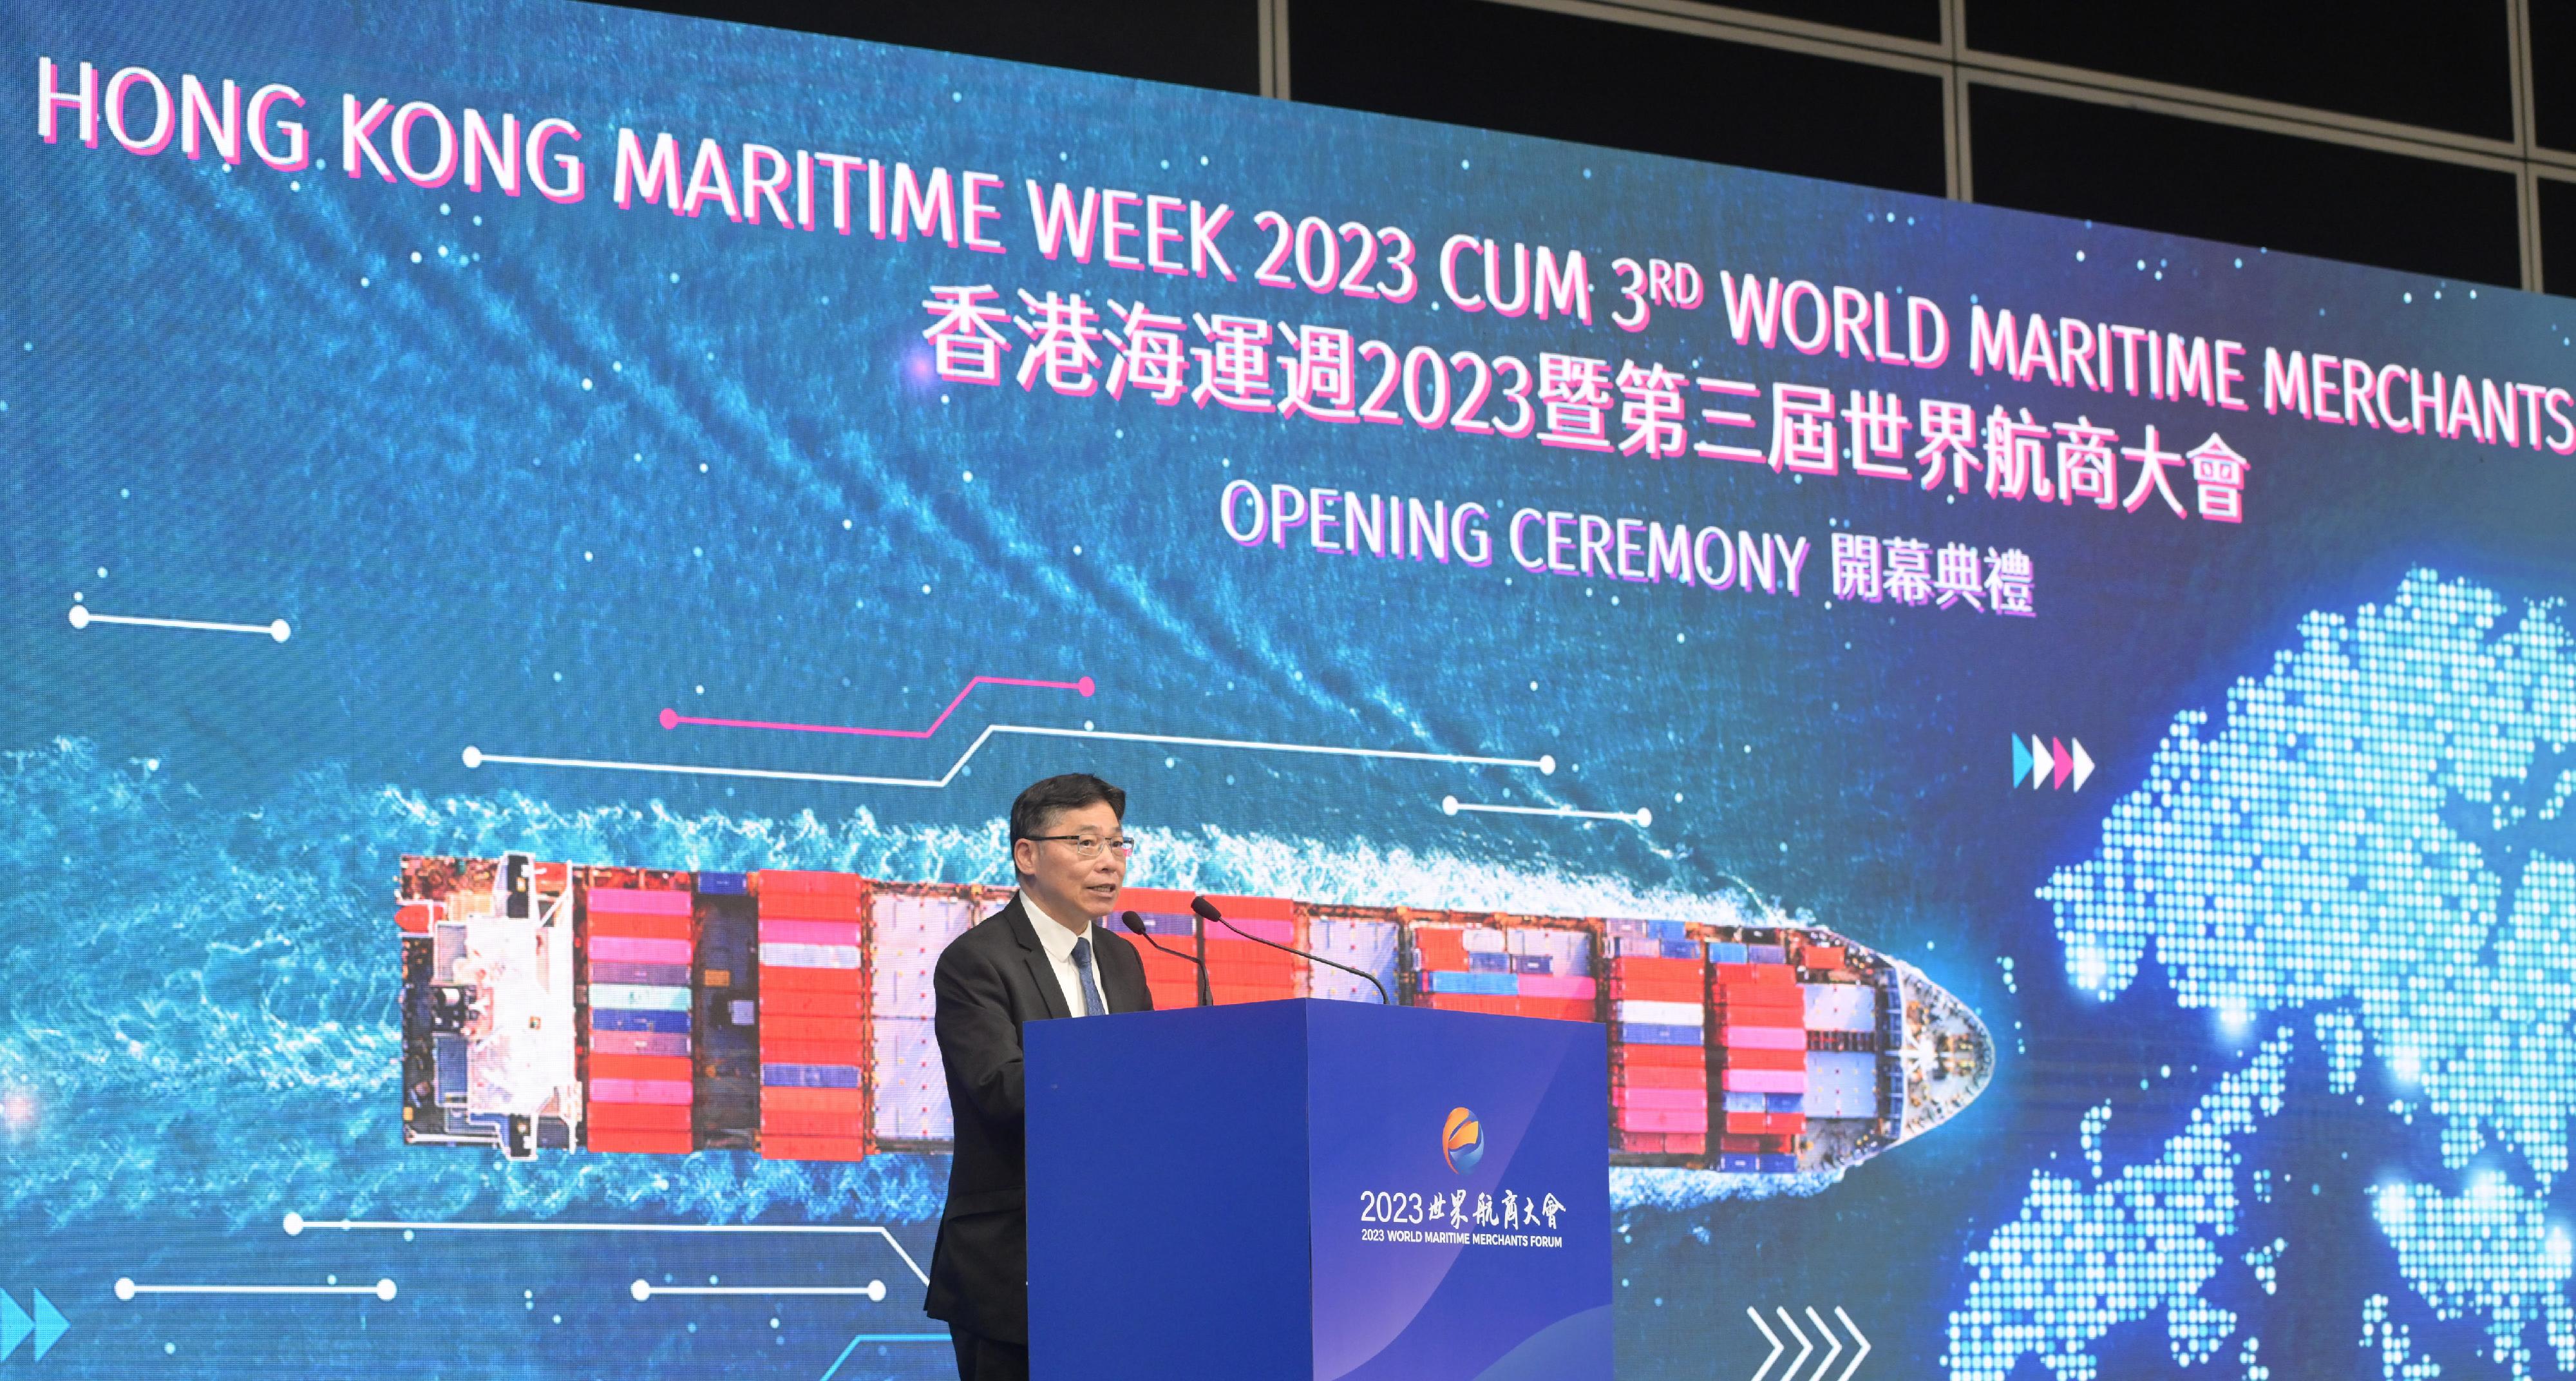 The opening ceremony of Hong Kong Maritime Week 2023, a major annual event of the maritime and port industries in Hong Kong, was held today (November 20). Photo shows the Chairman of the Hong Kong Maritime and Port Board and Secretary for Transport and Logistics, Mr Lam Sai-hung, giving a speech at the ceremony.